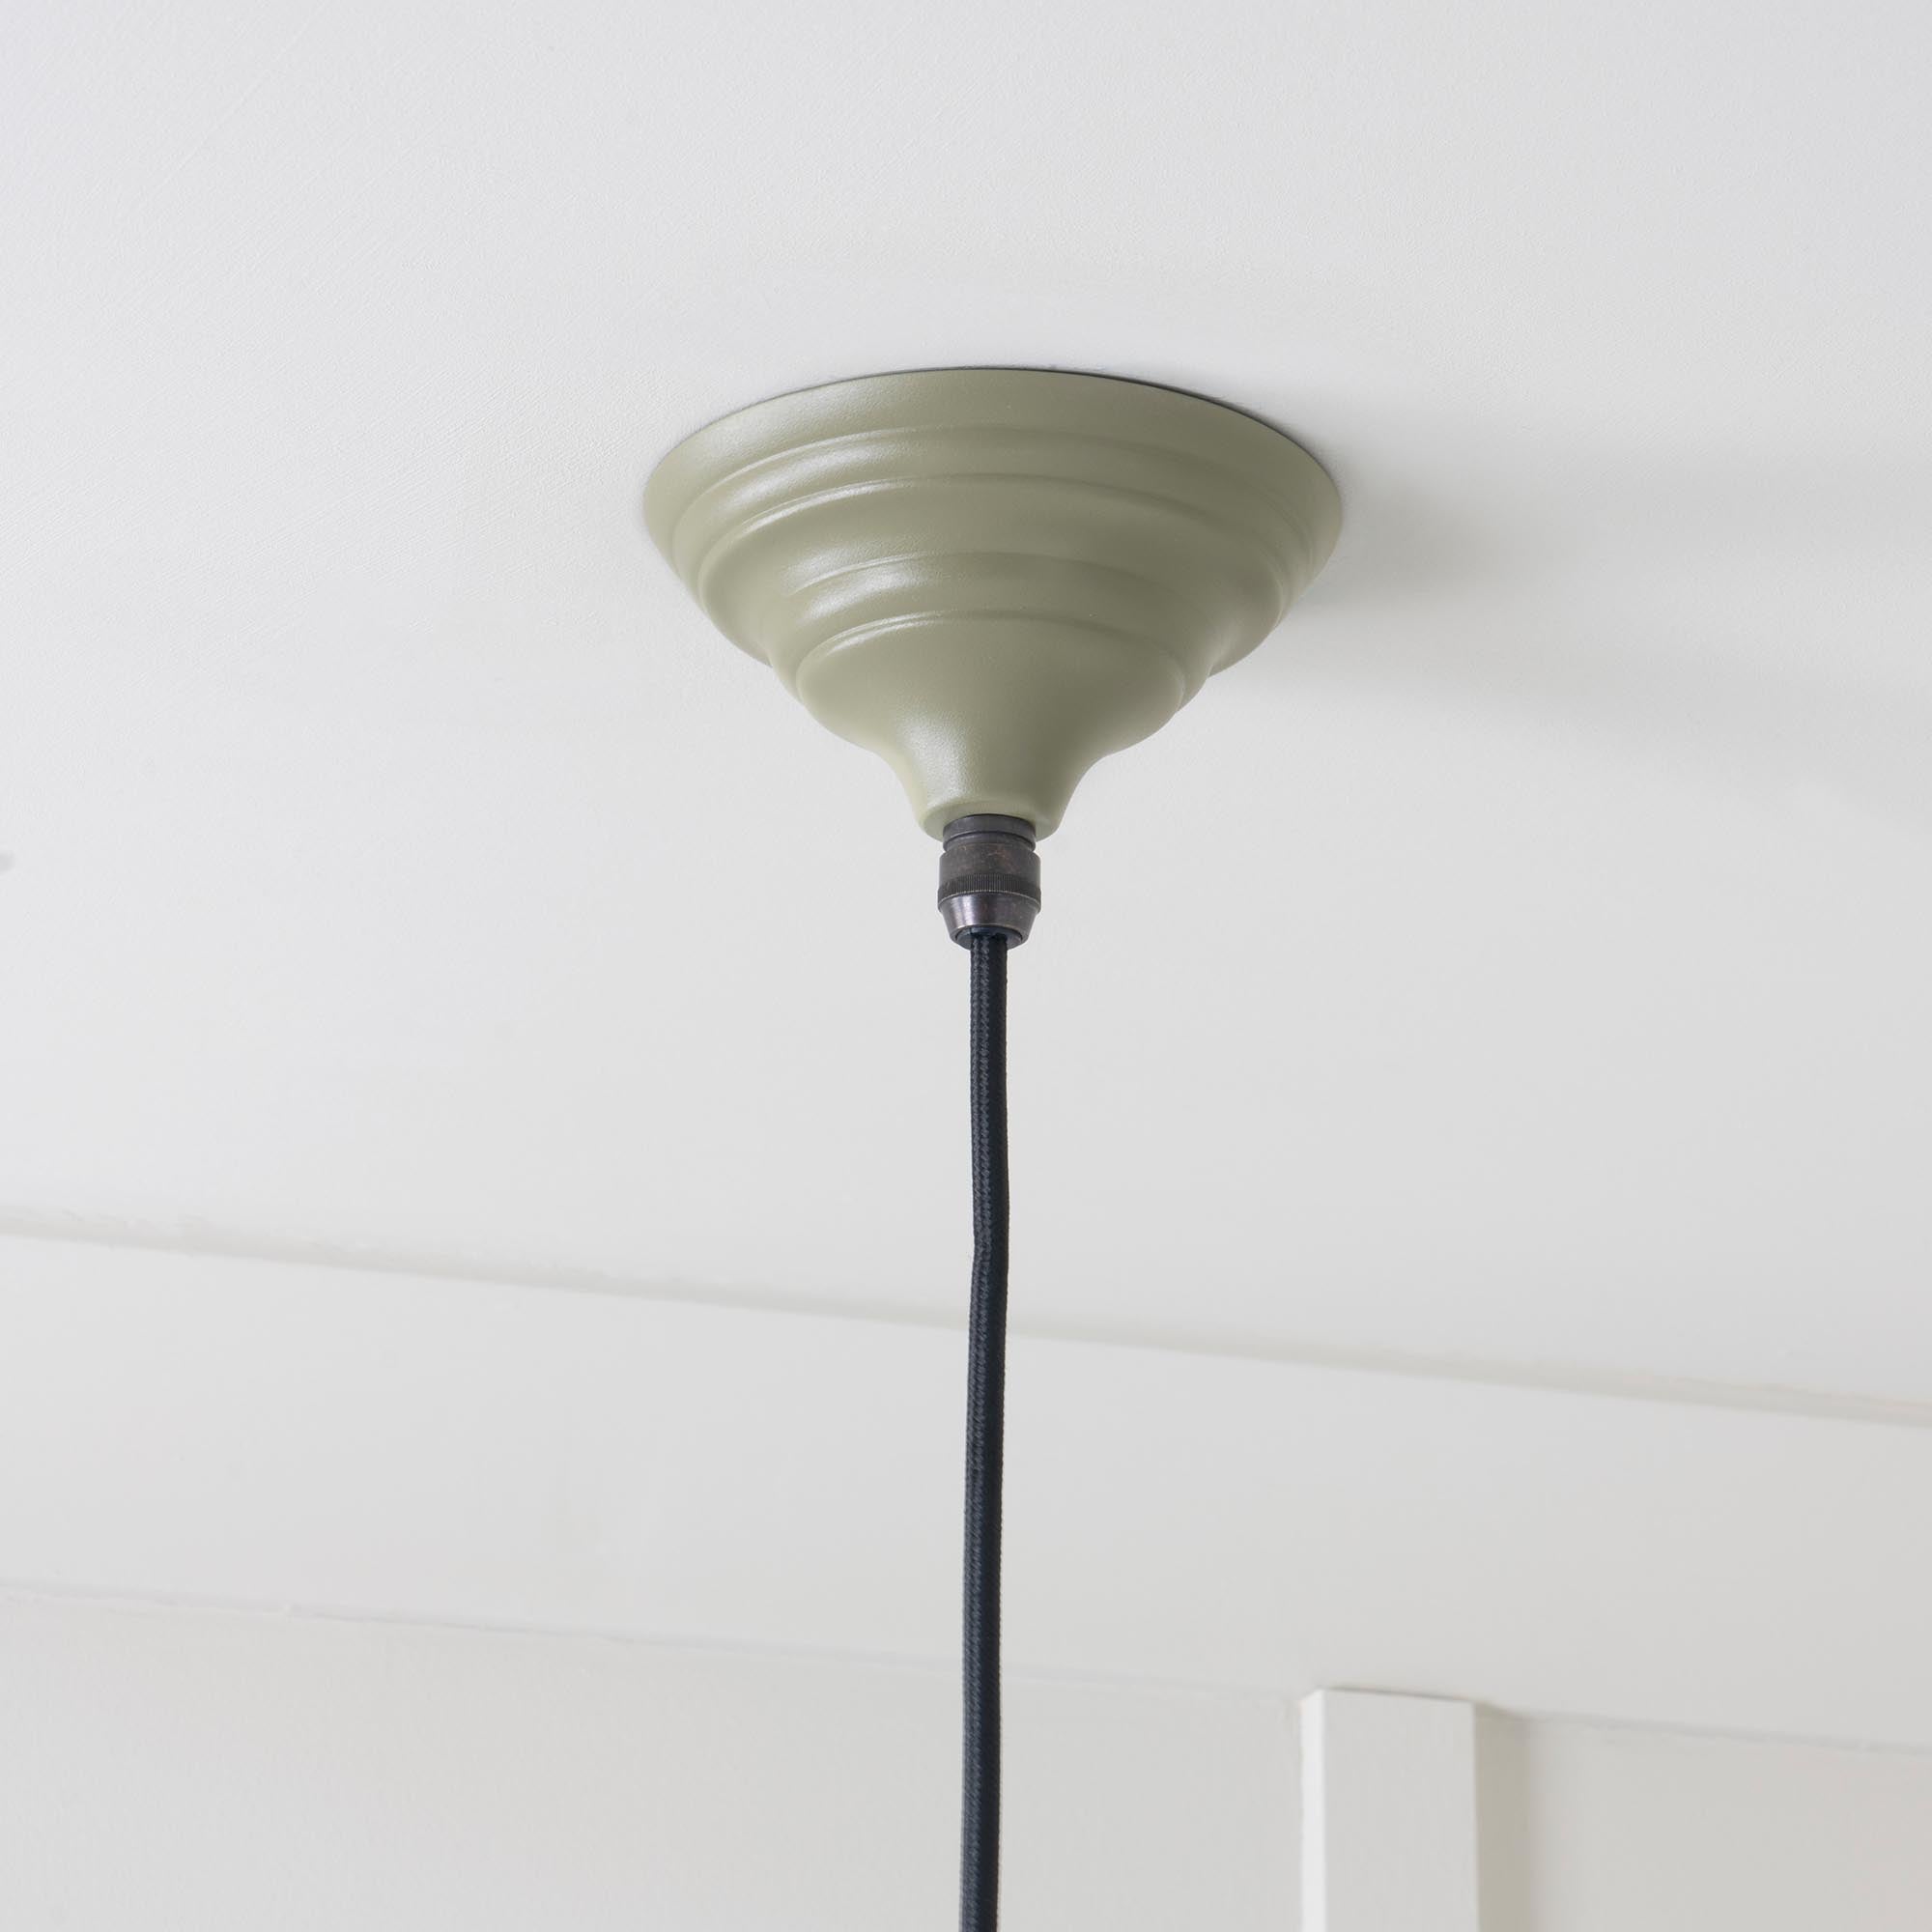 SHOW Close Up Image of Ceiling Rose for Brindley Ceiling Light in Tump